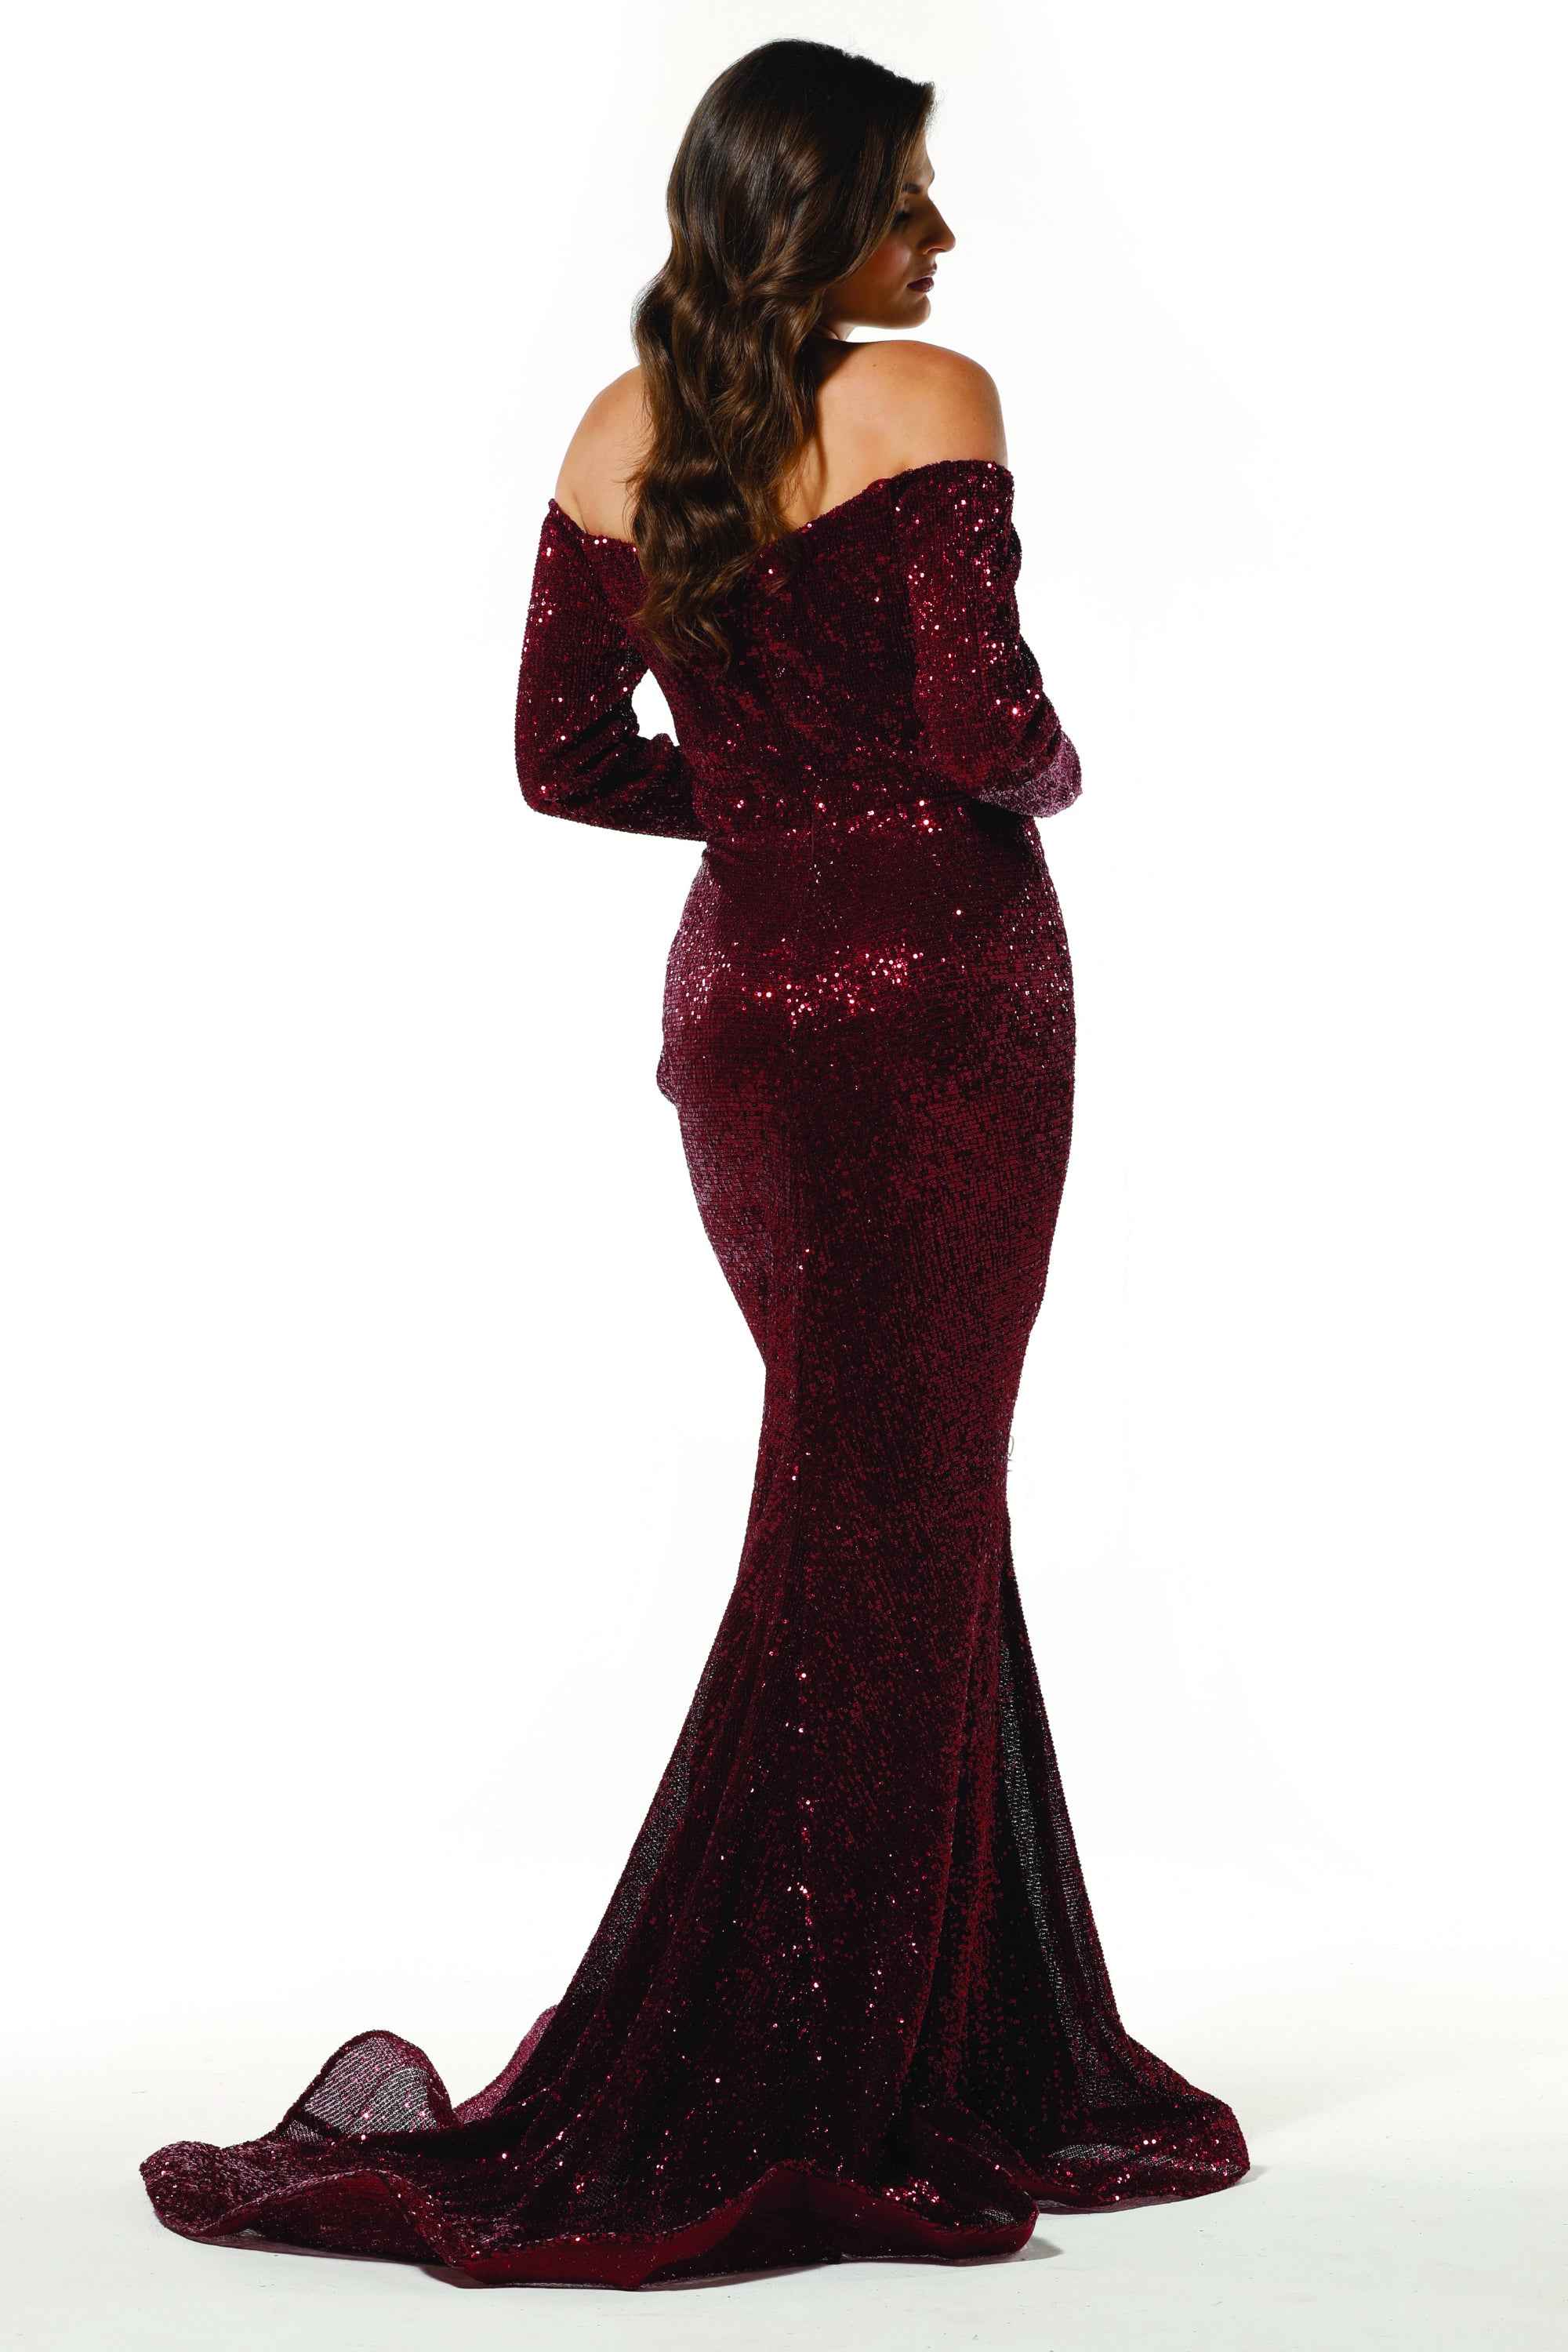 Tinaholy Couture T1842 Wine Beaded Sequin Mermaid Train Formal Gown Prom Dress Tina Holly Couture$ AfterPay Humm ZipPay LayBuy Sezzle